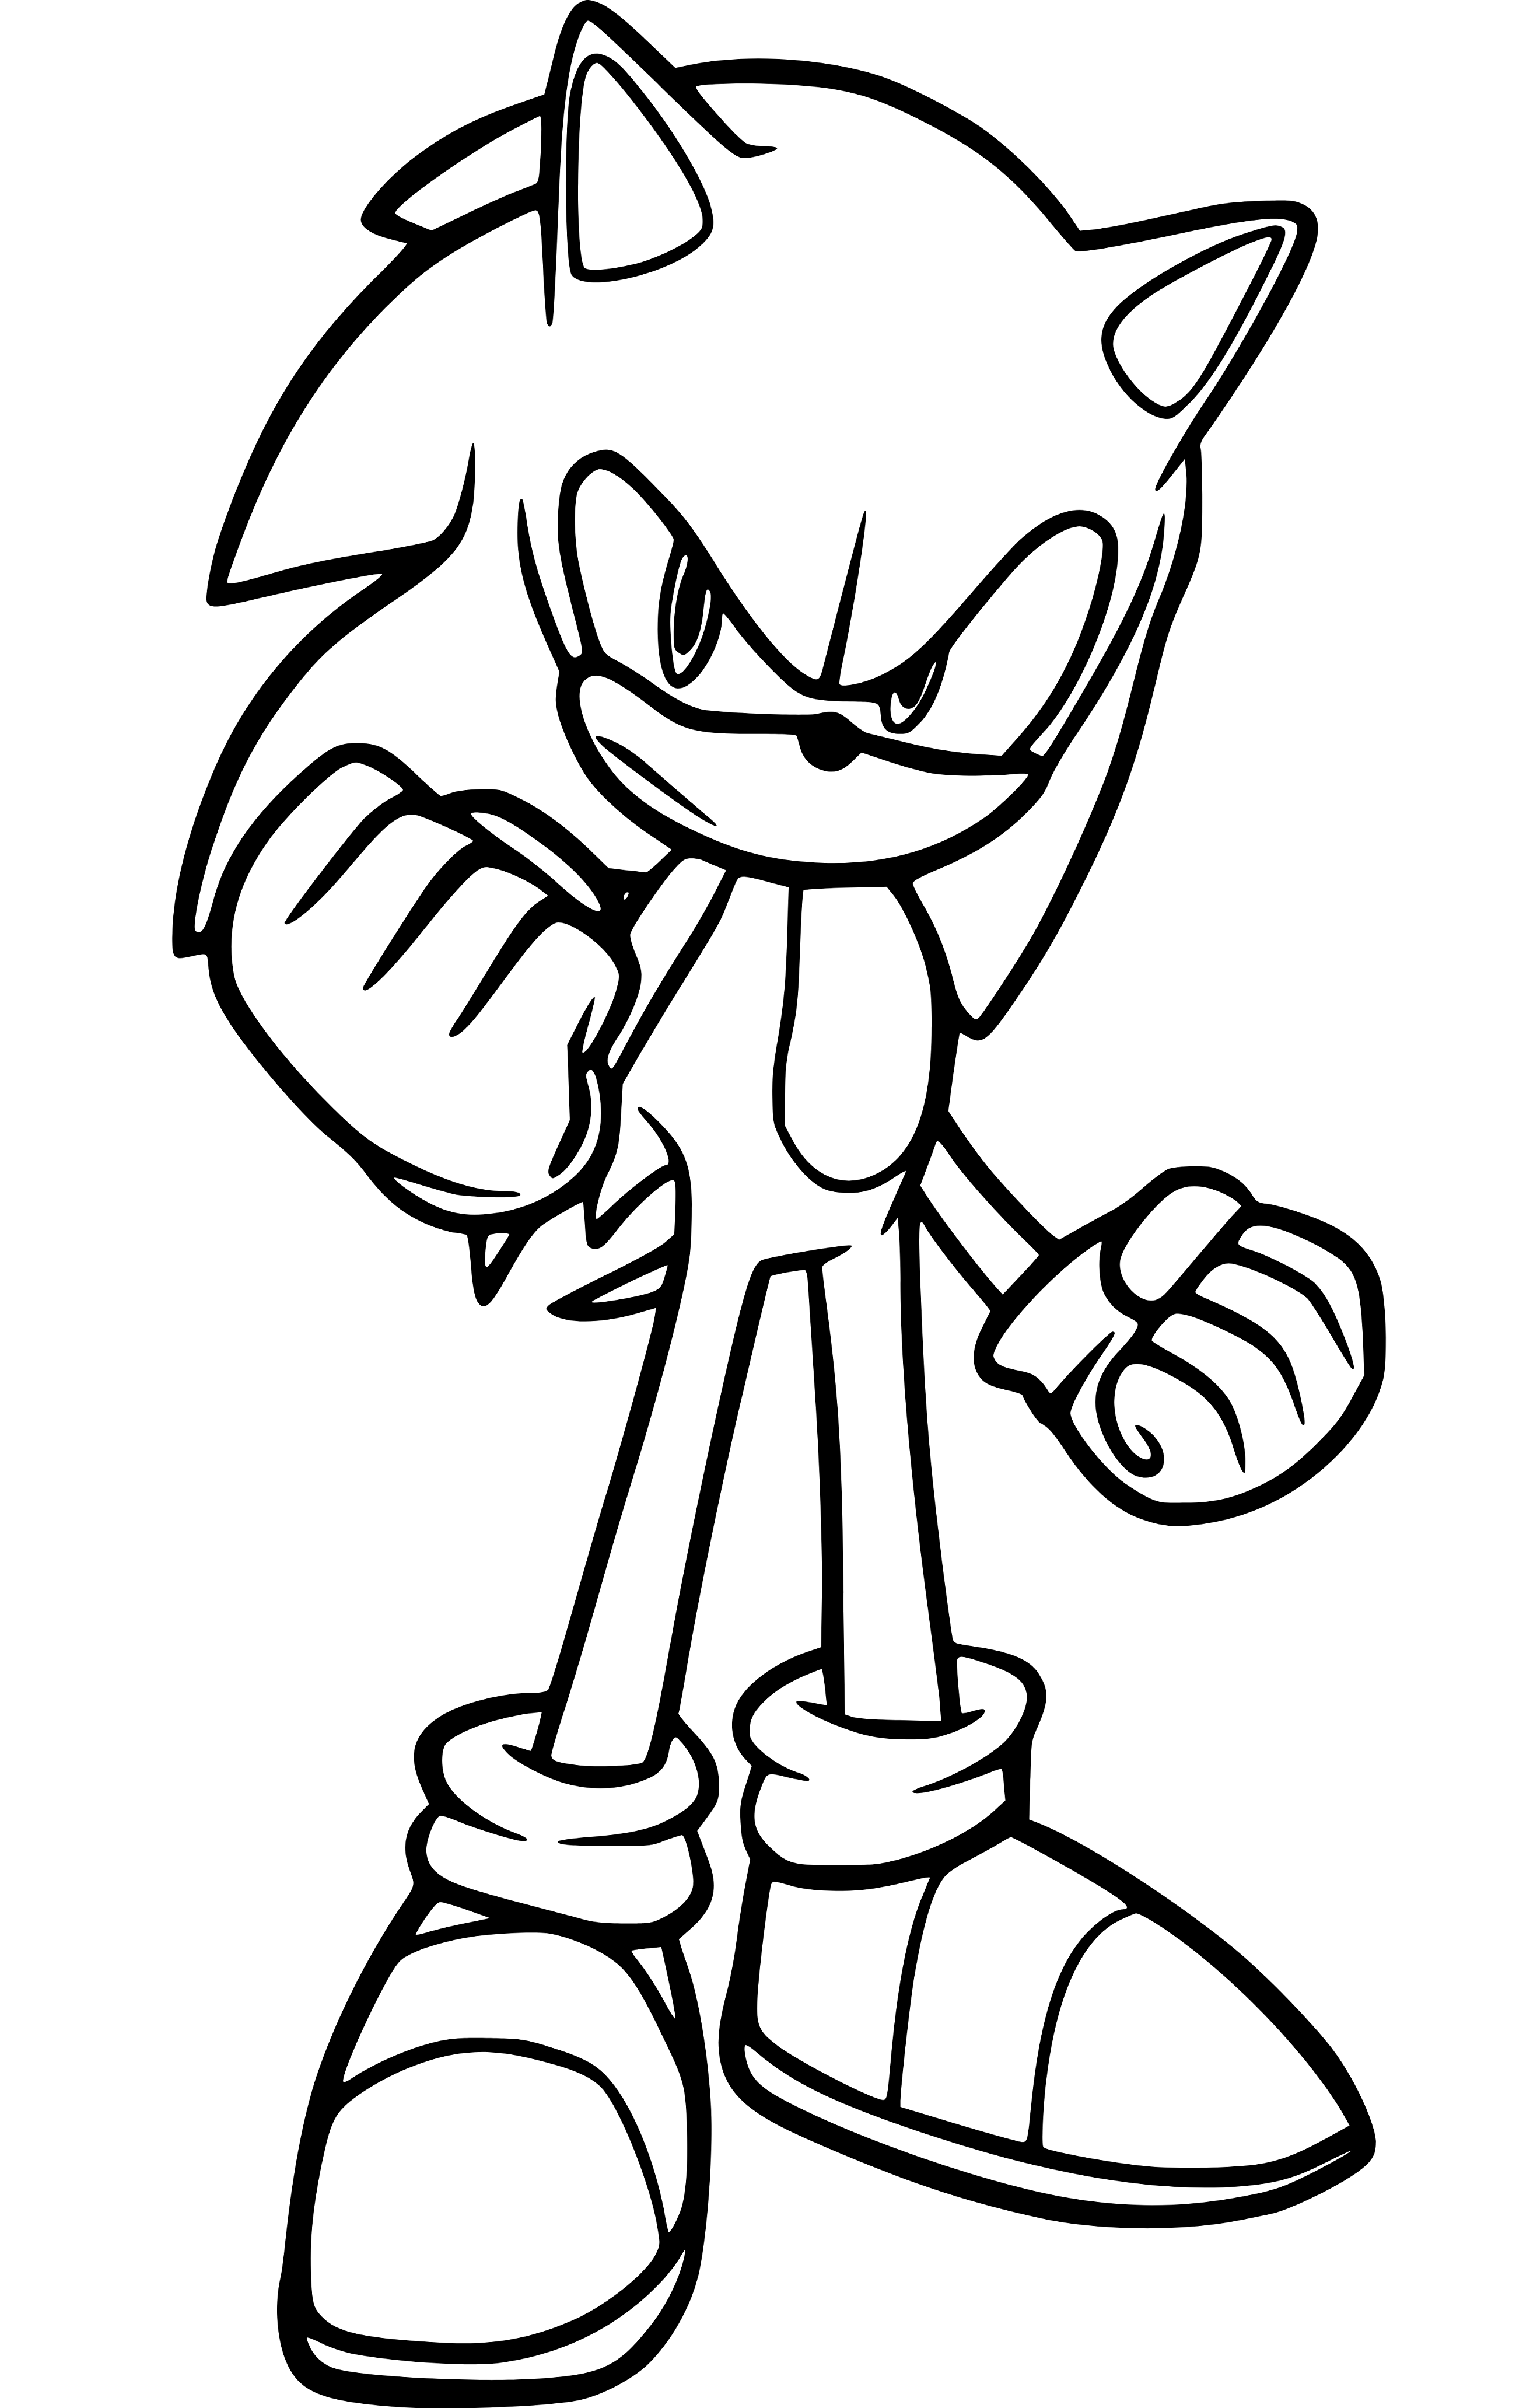 Sonic black and white coloring page - SheetalColor.com